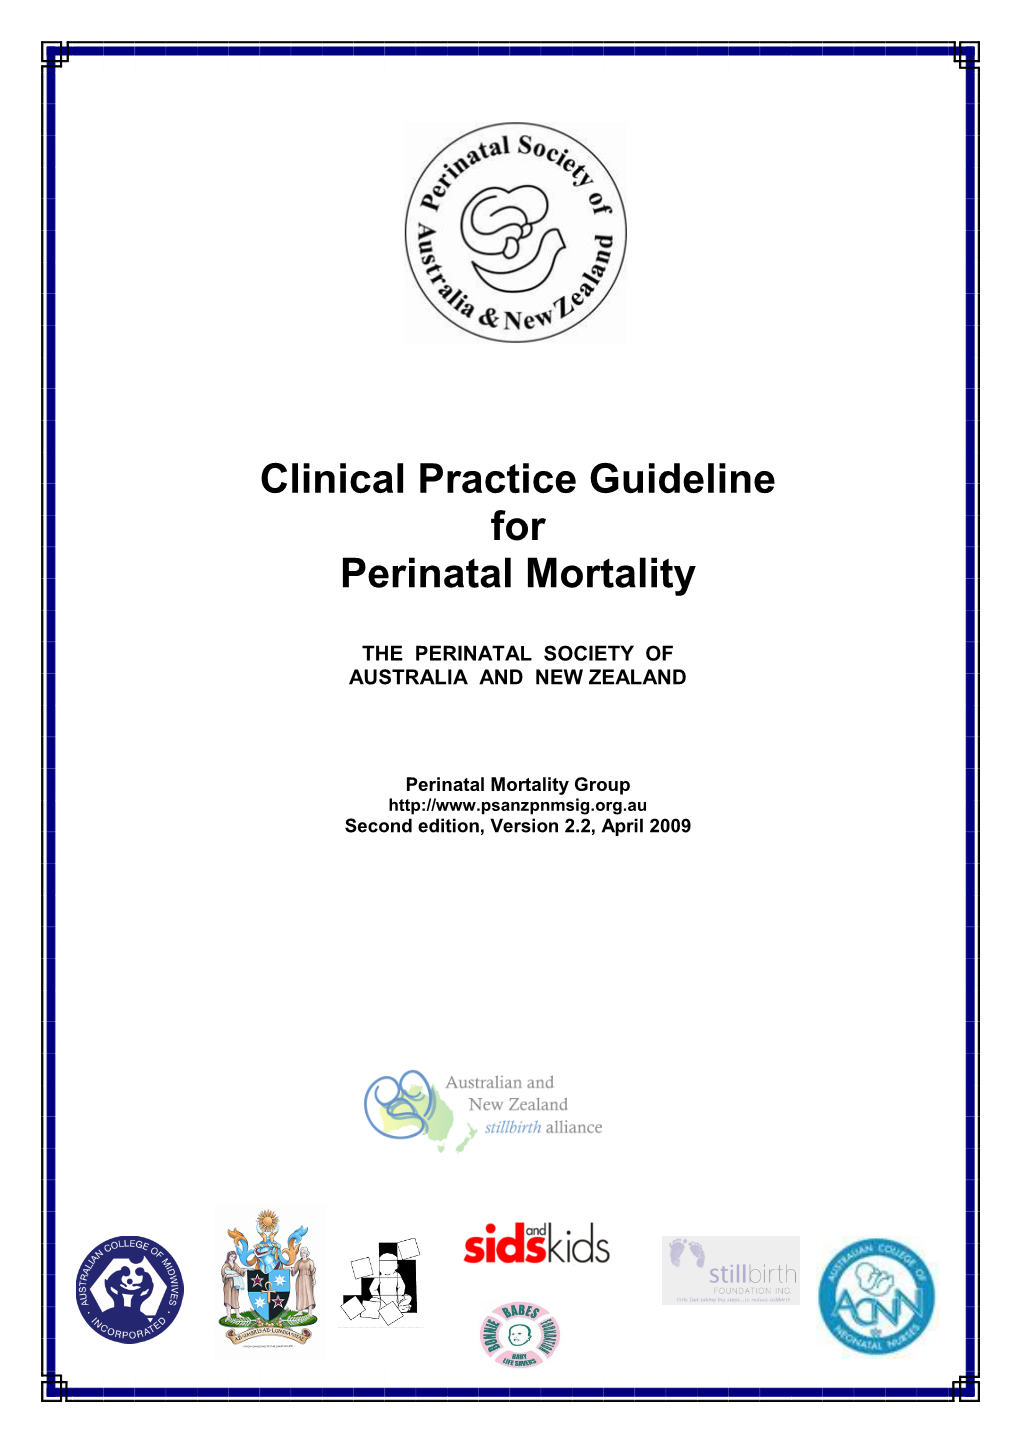 Clinical Practice Guideline for Perinatal Mortality